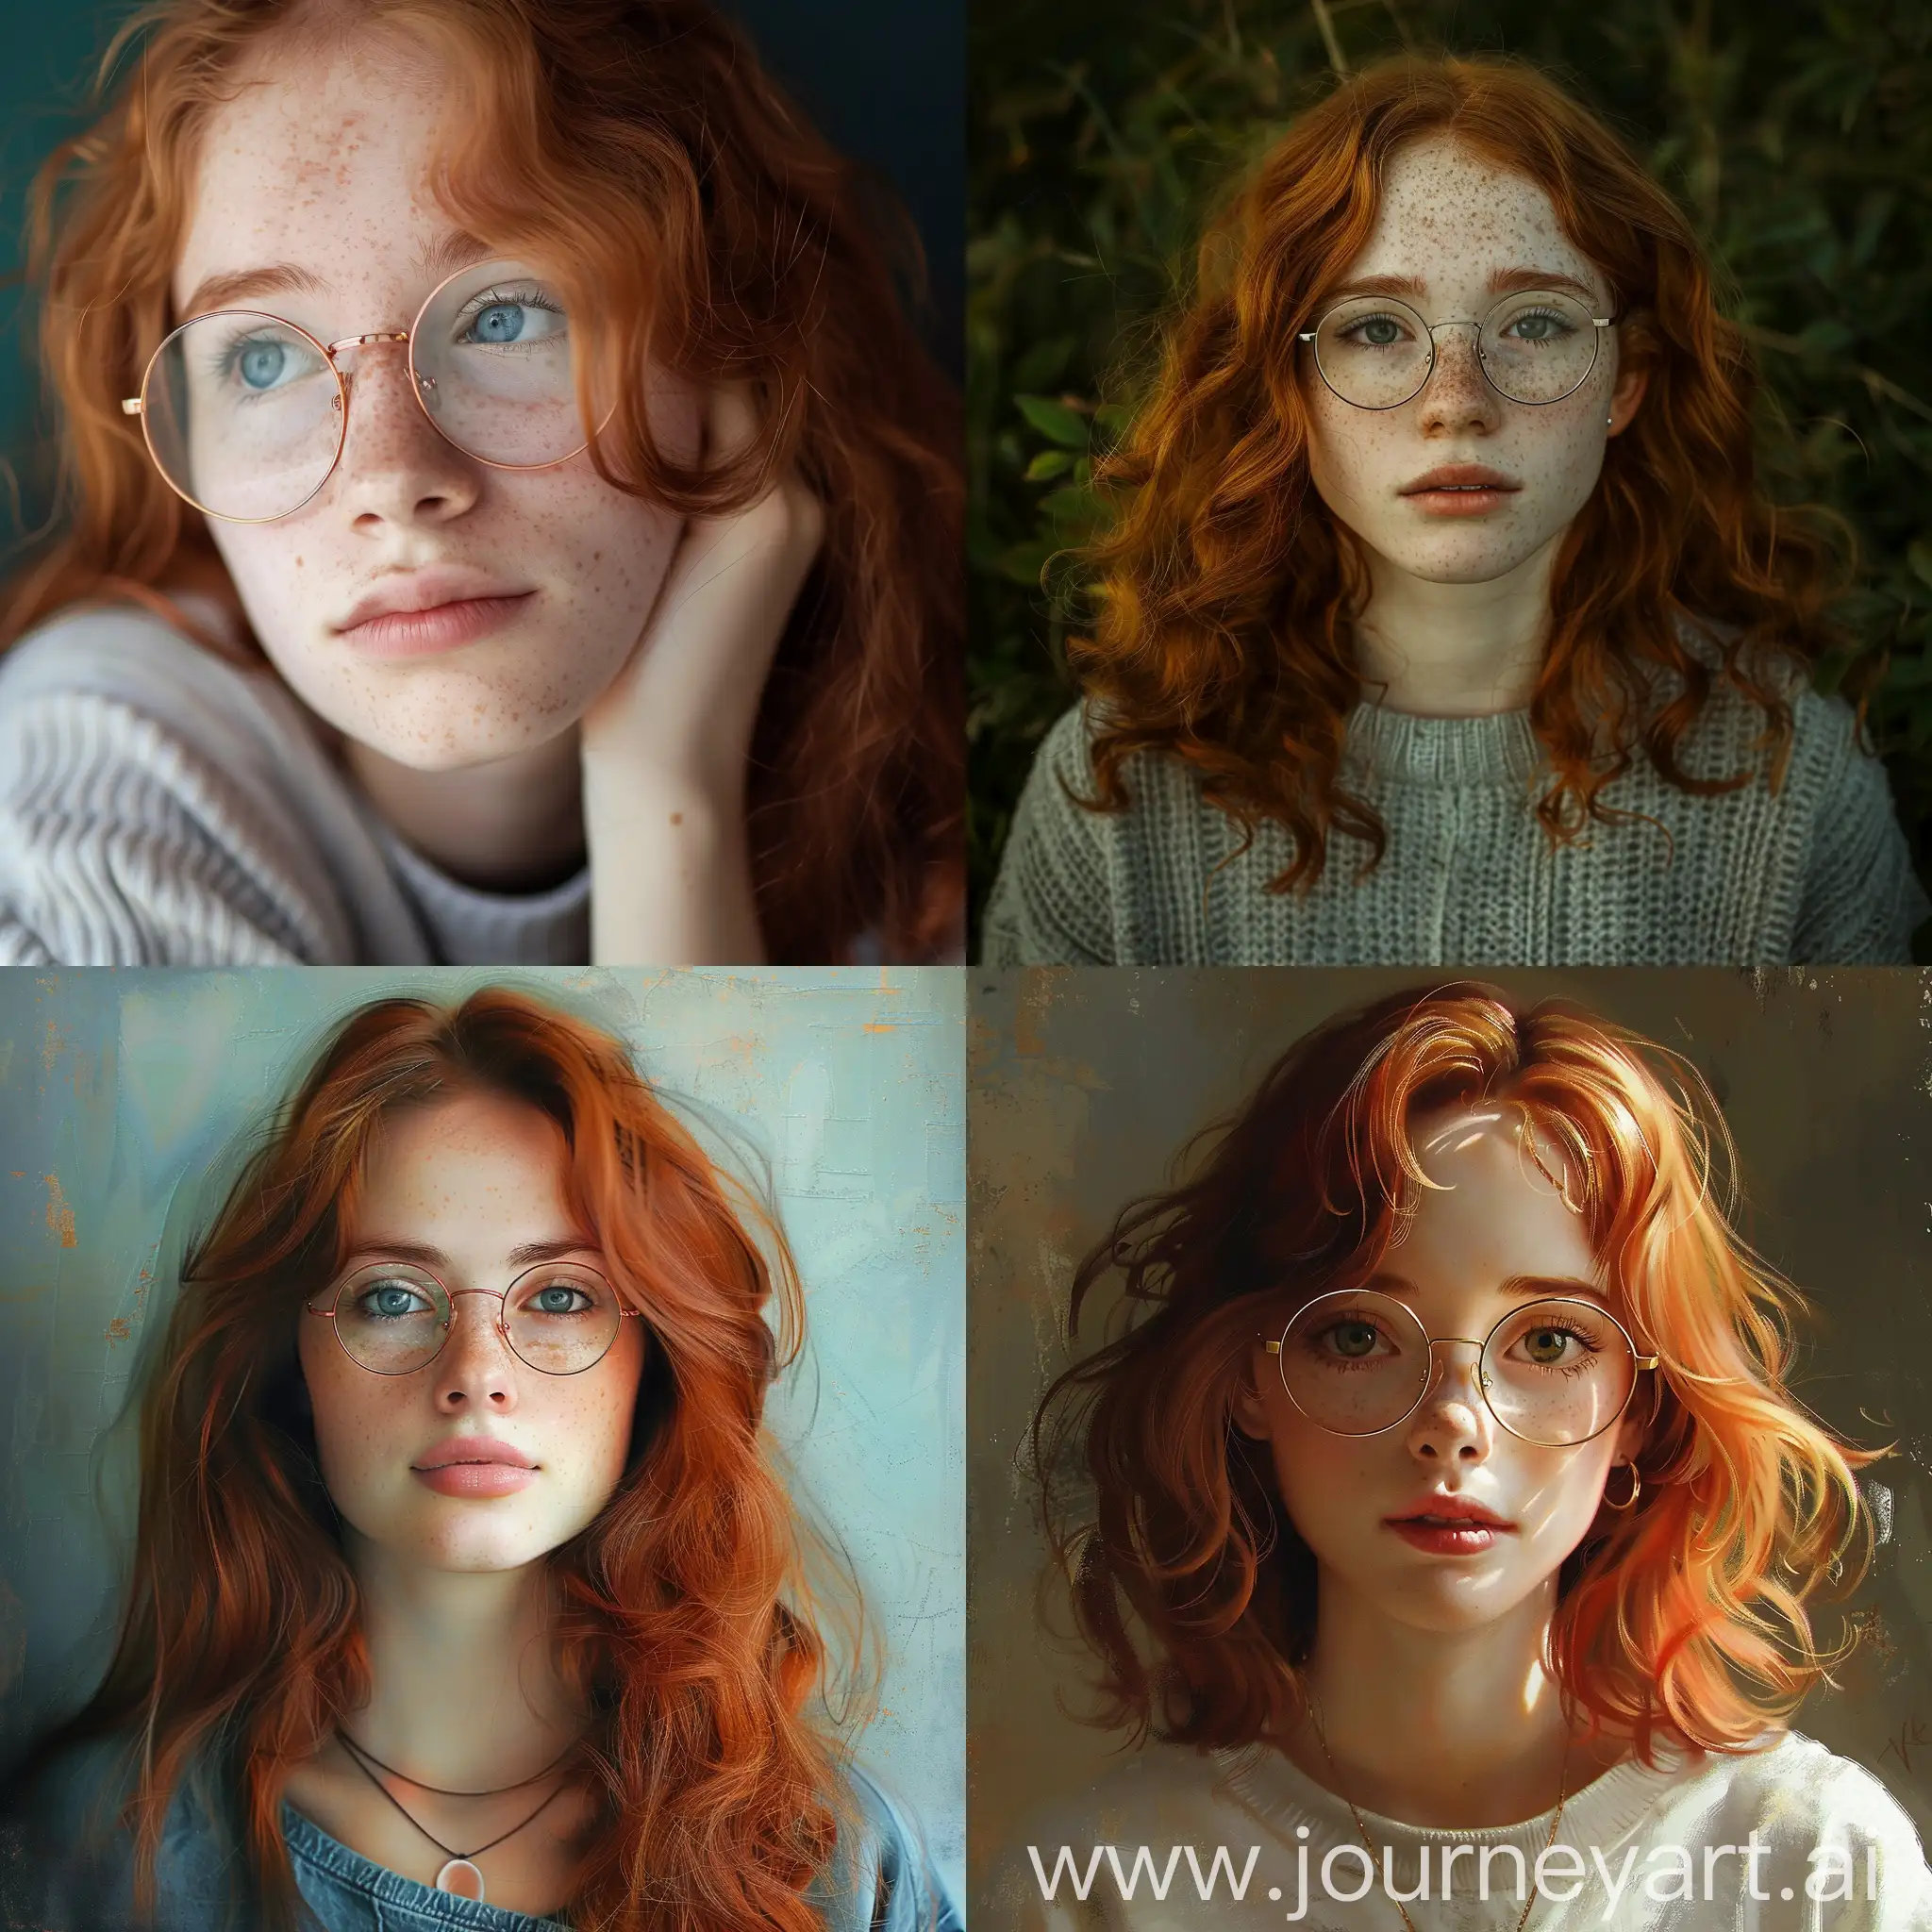 Young-Redhead-Girl-with-Glasses-Portrait-in-Modern-Style